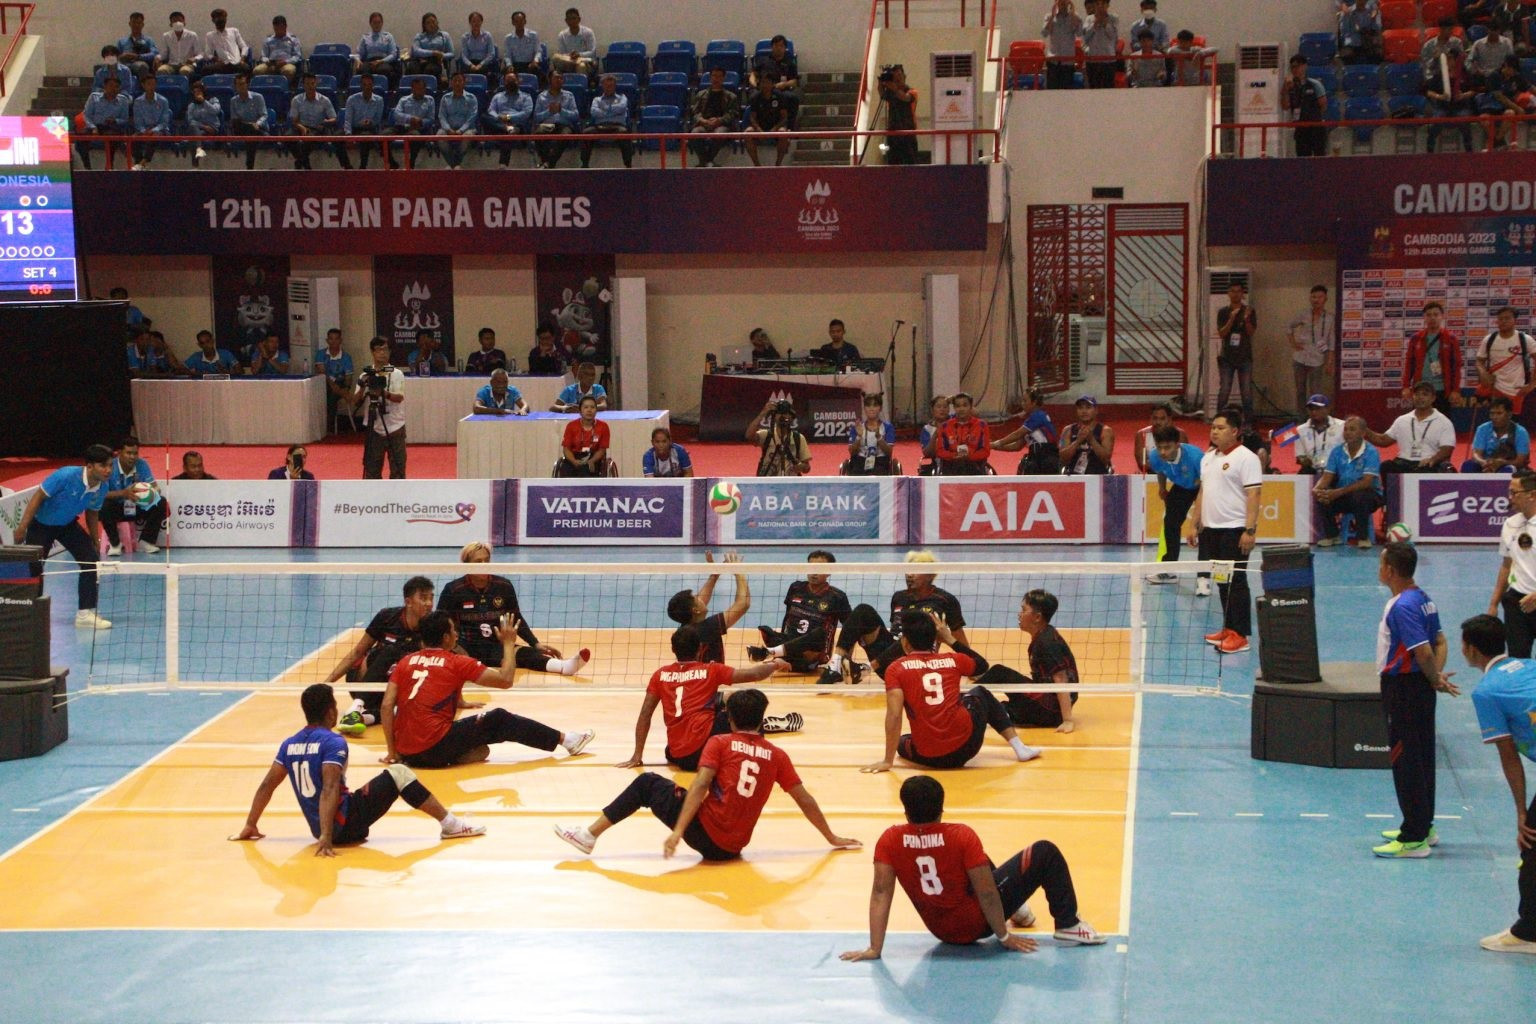 Indonesia enjoyed success in sitting volleyball as they continue to increase their medal tally ©ASPF